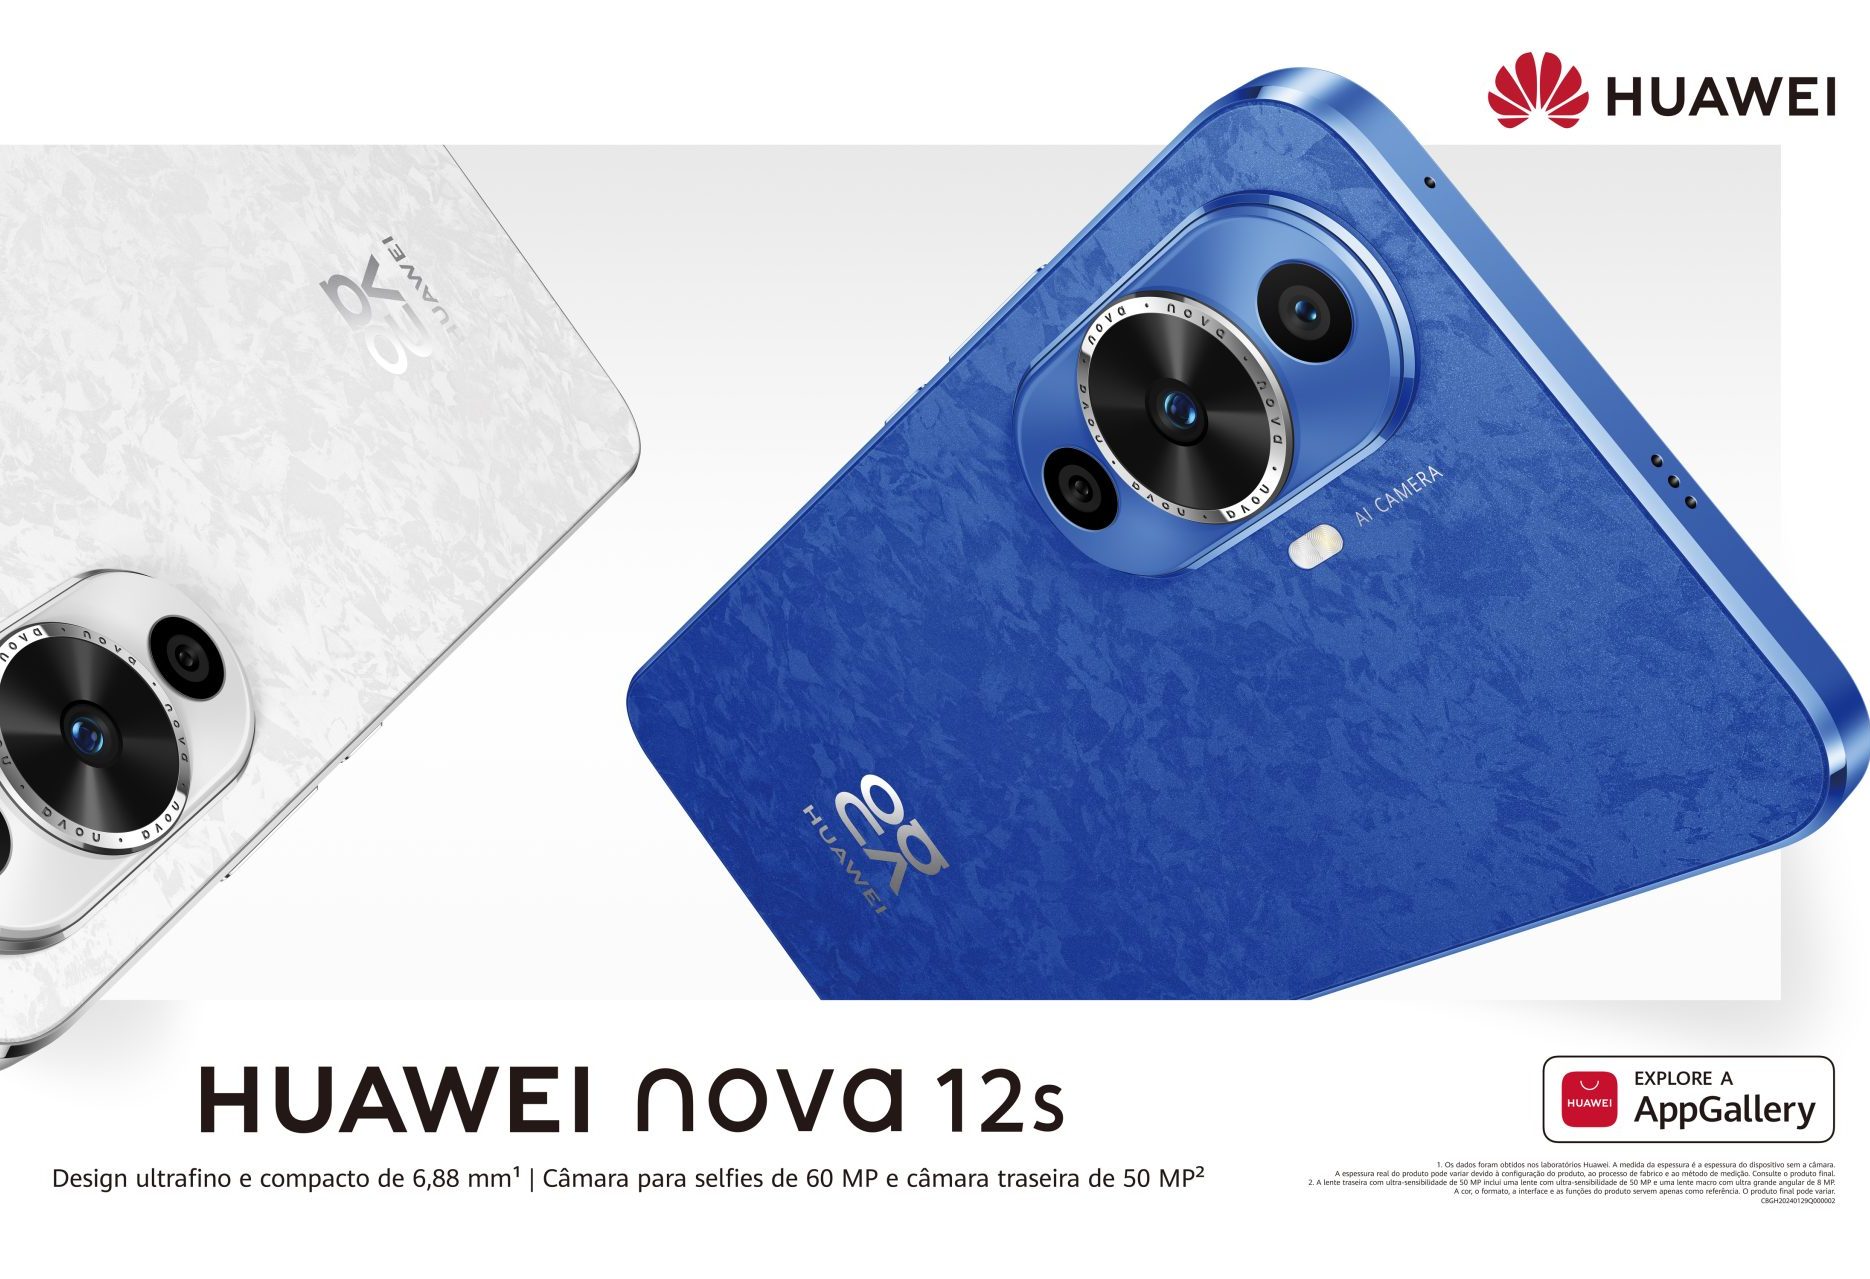 Huawei introduces a new range of smartphones and wearable devices